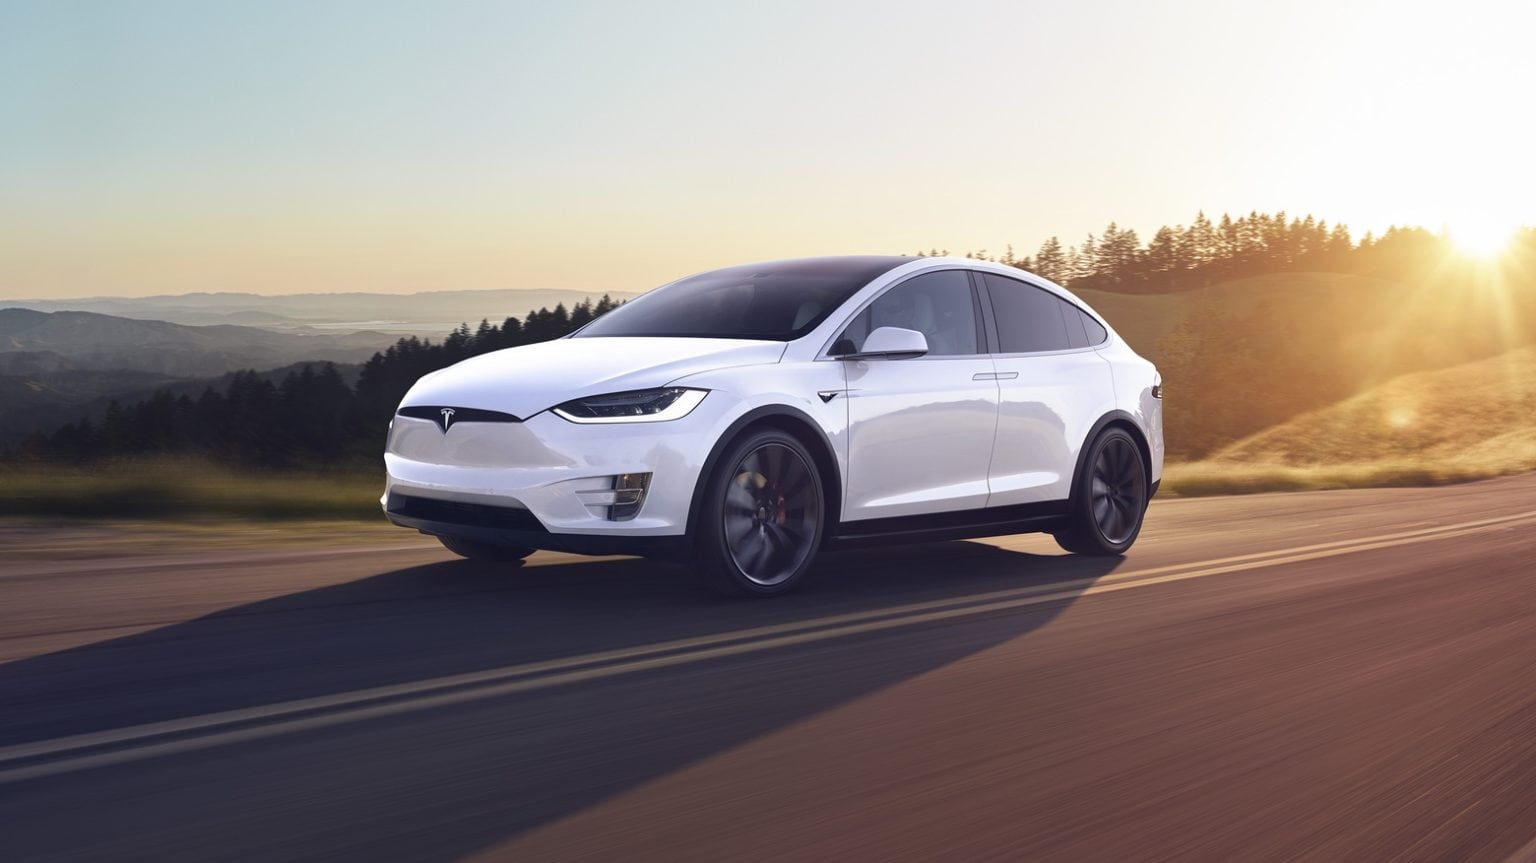 A Tesla Model X similar to this one crashed in 2018.